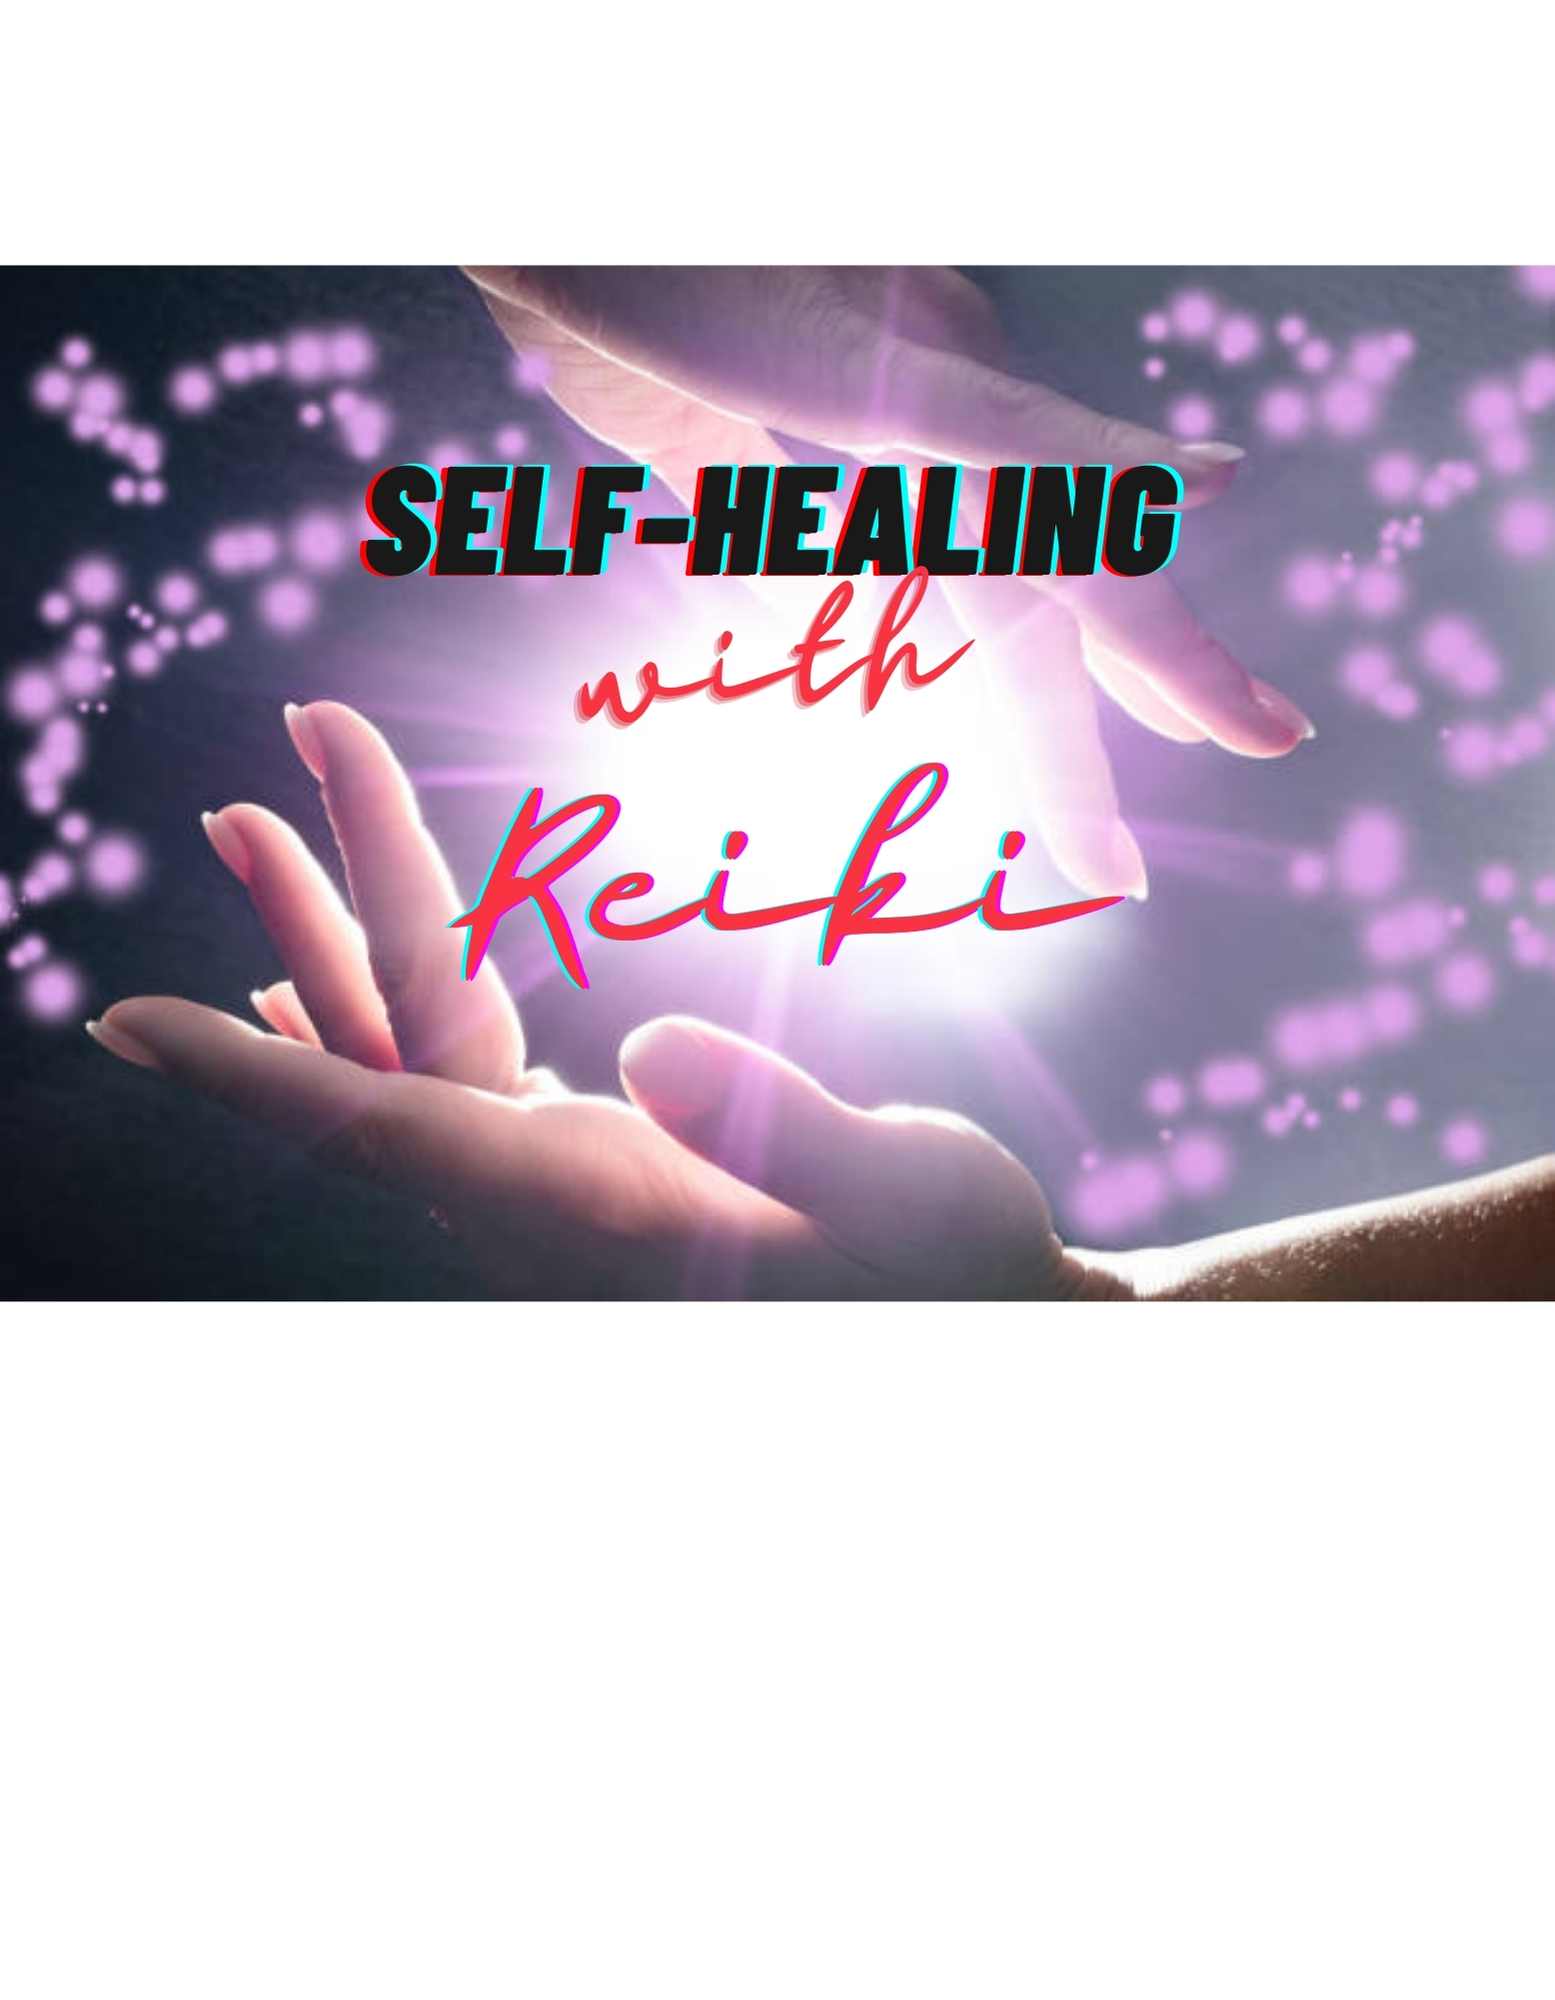 Reiki For Self-Healing - Is It Really Possible?